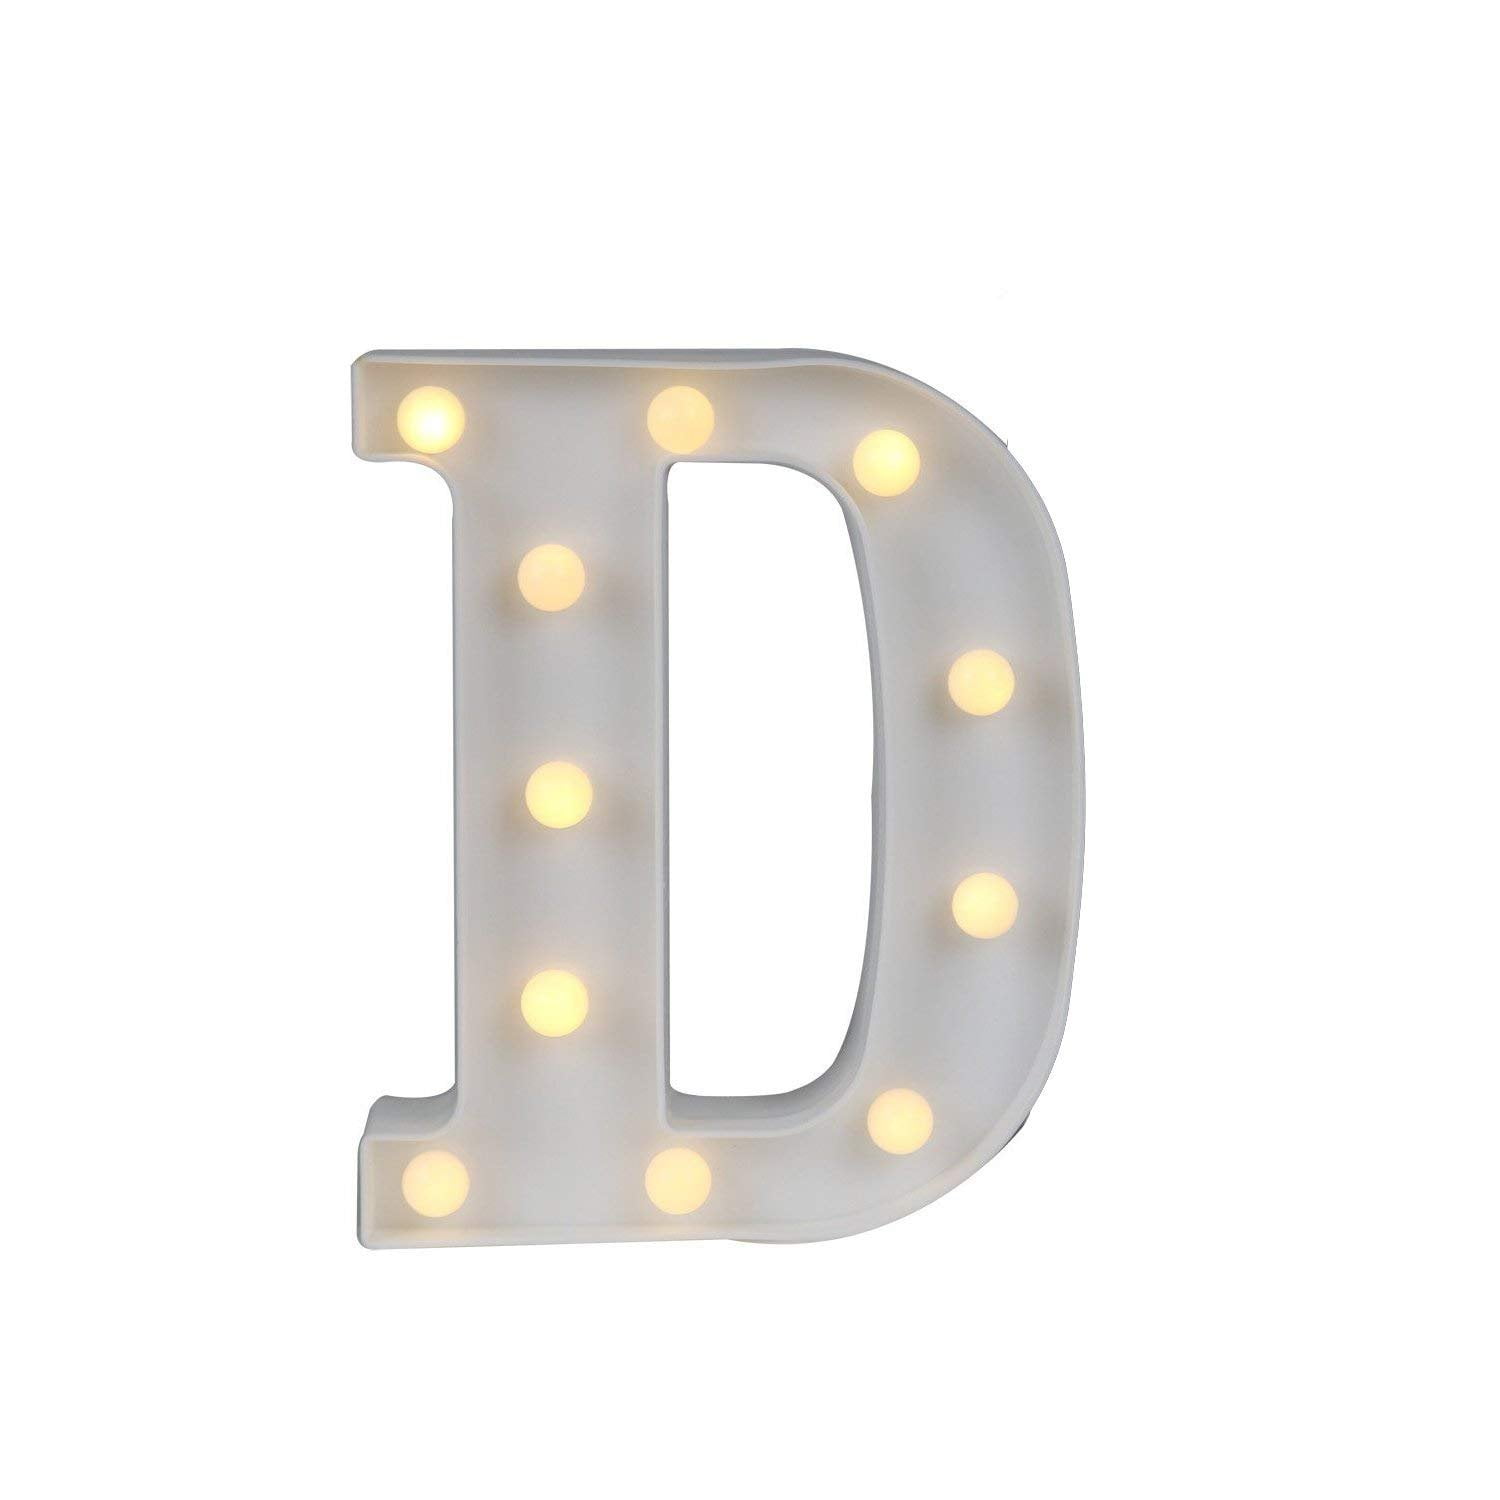 ALPHABET LETTERS NUMBERS LED LIGHT UP WARMWHITE PLASTIC STANDING PARTY WEDDING 